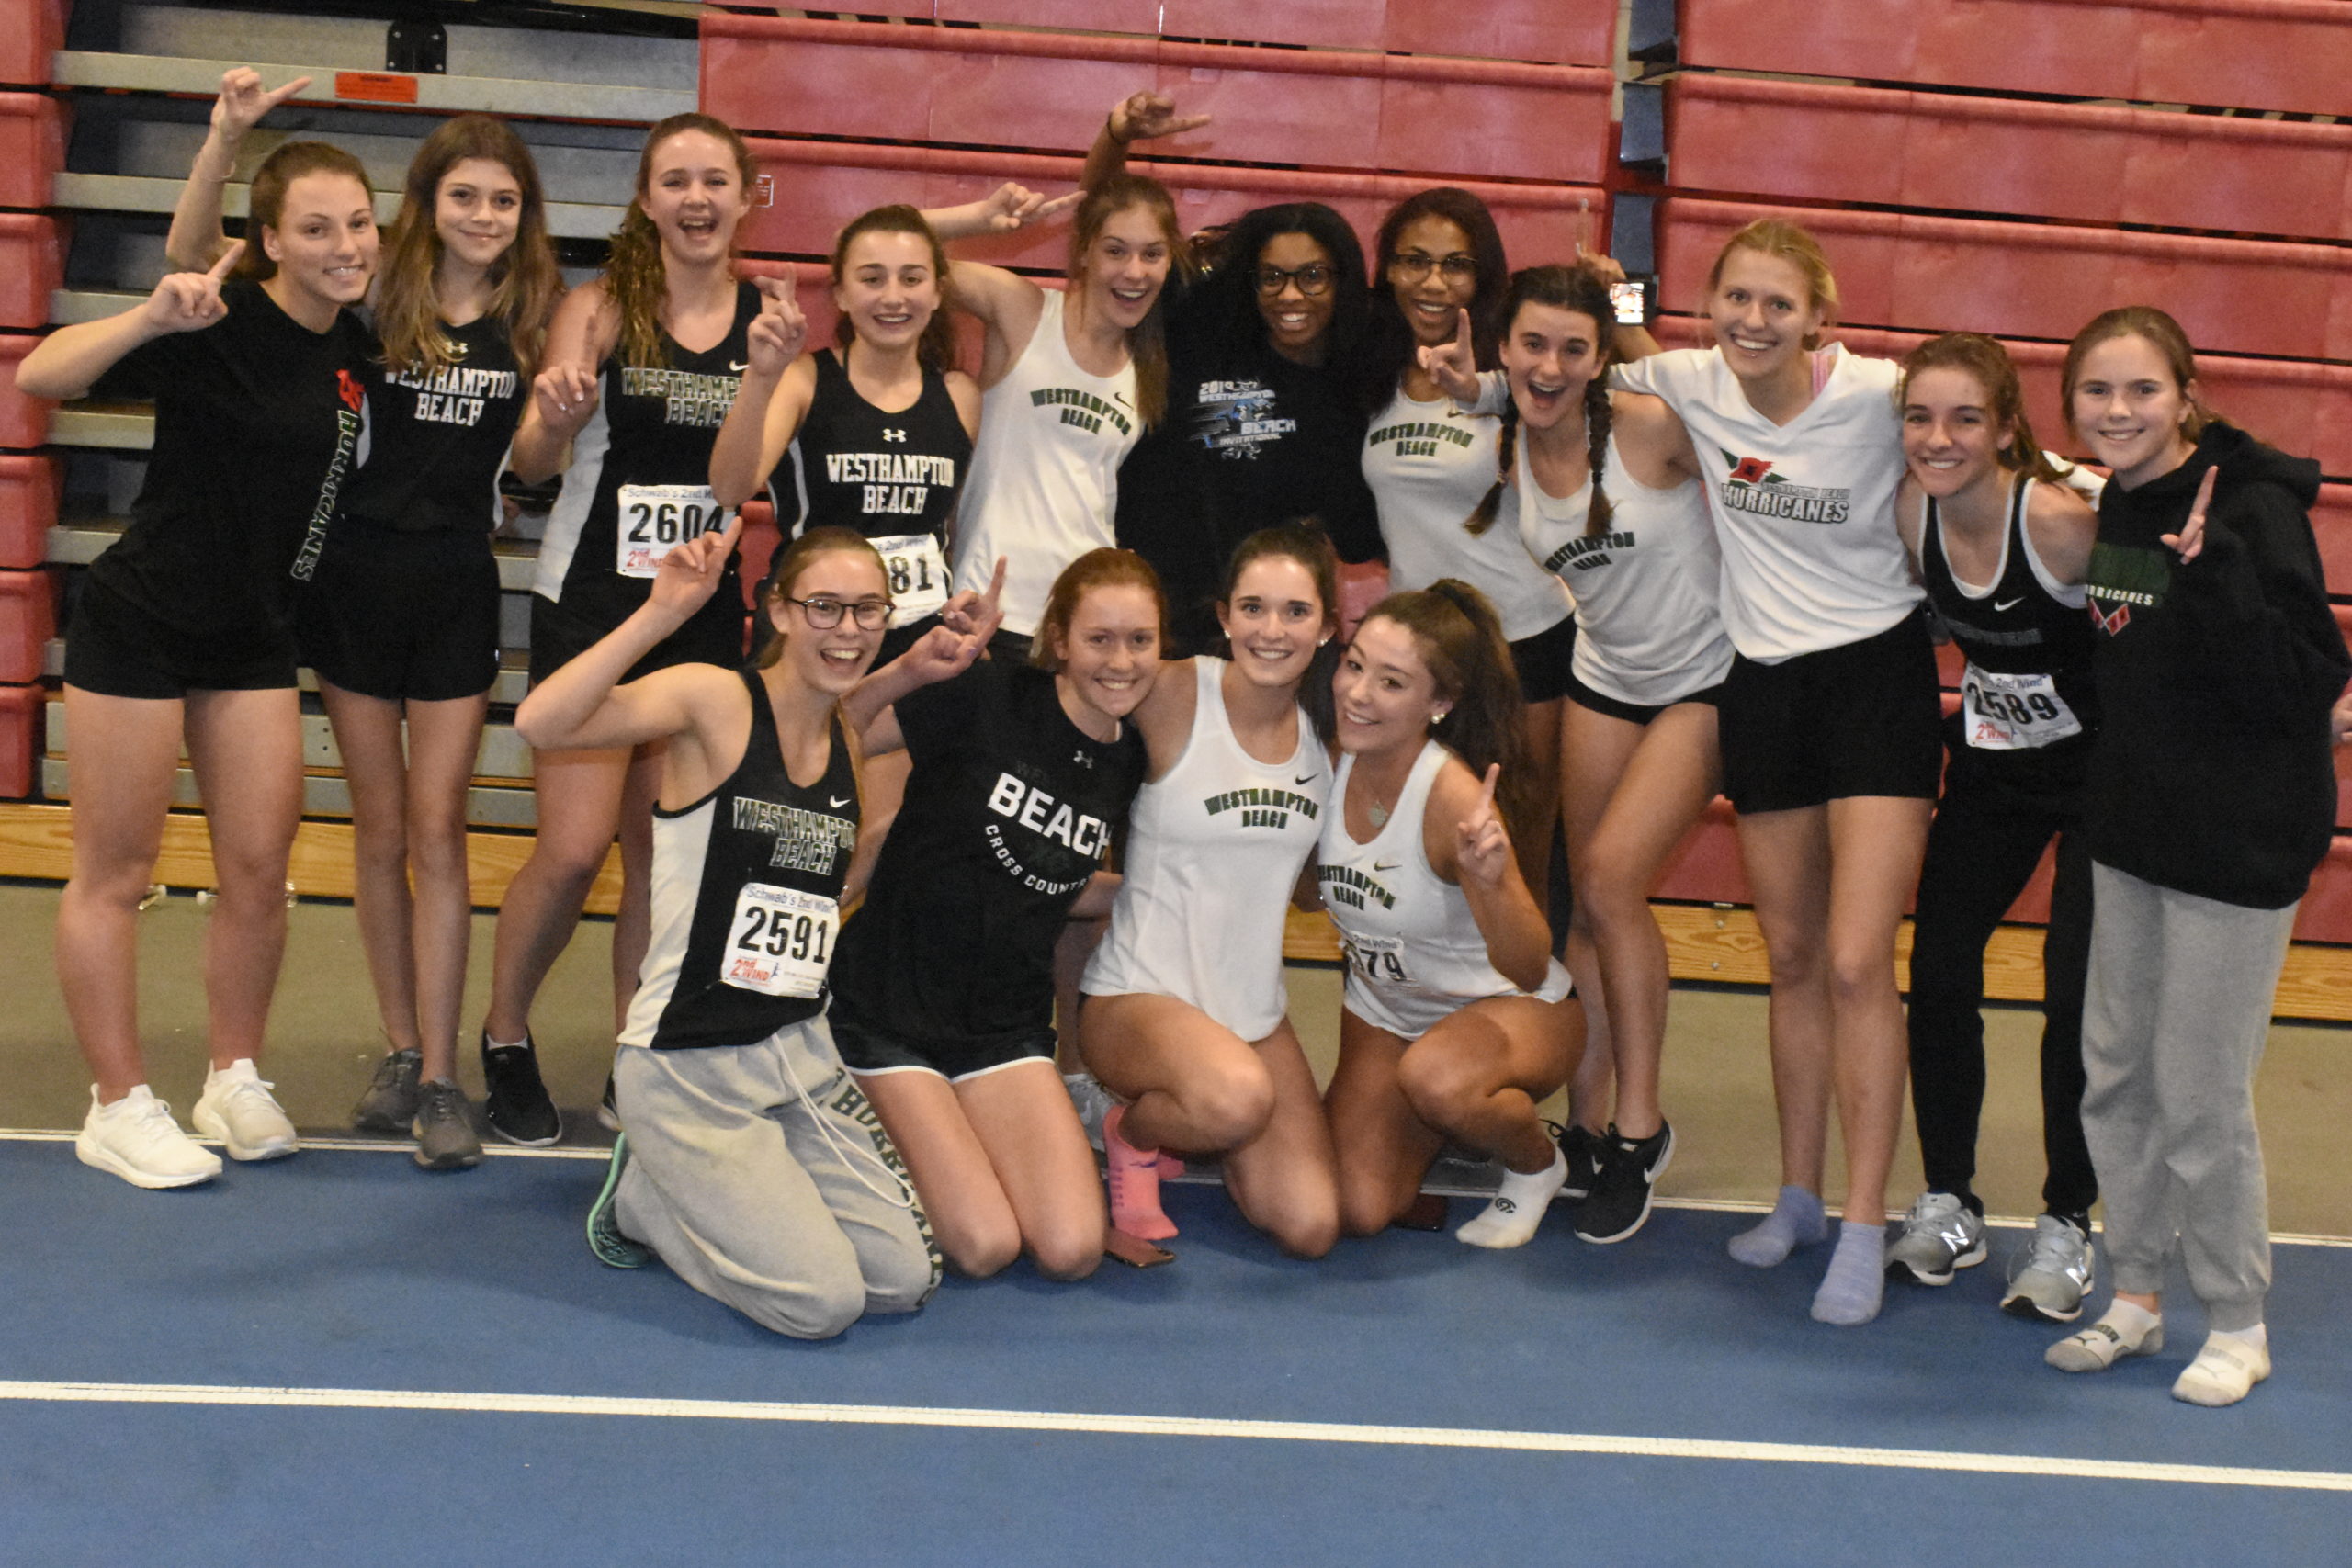 The Westhampton Beach girls indoor track team won the League IV Championships for the second year in a row on Friday night.